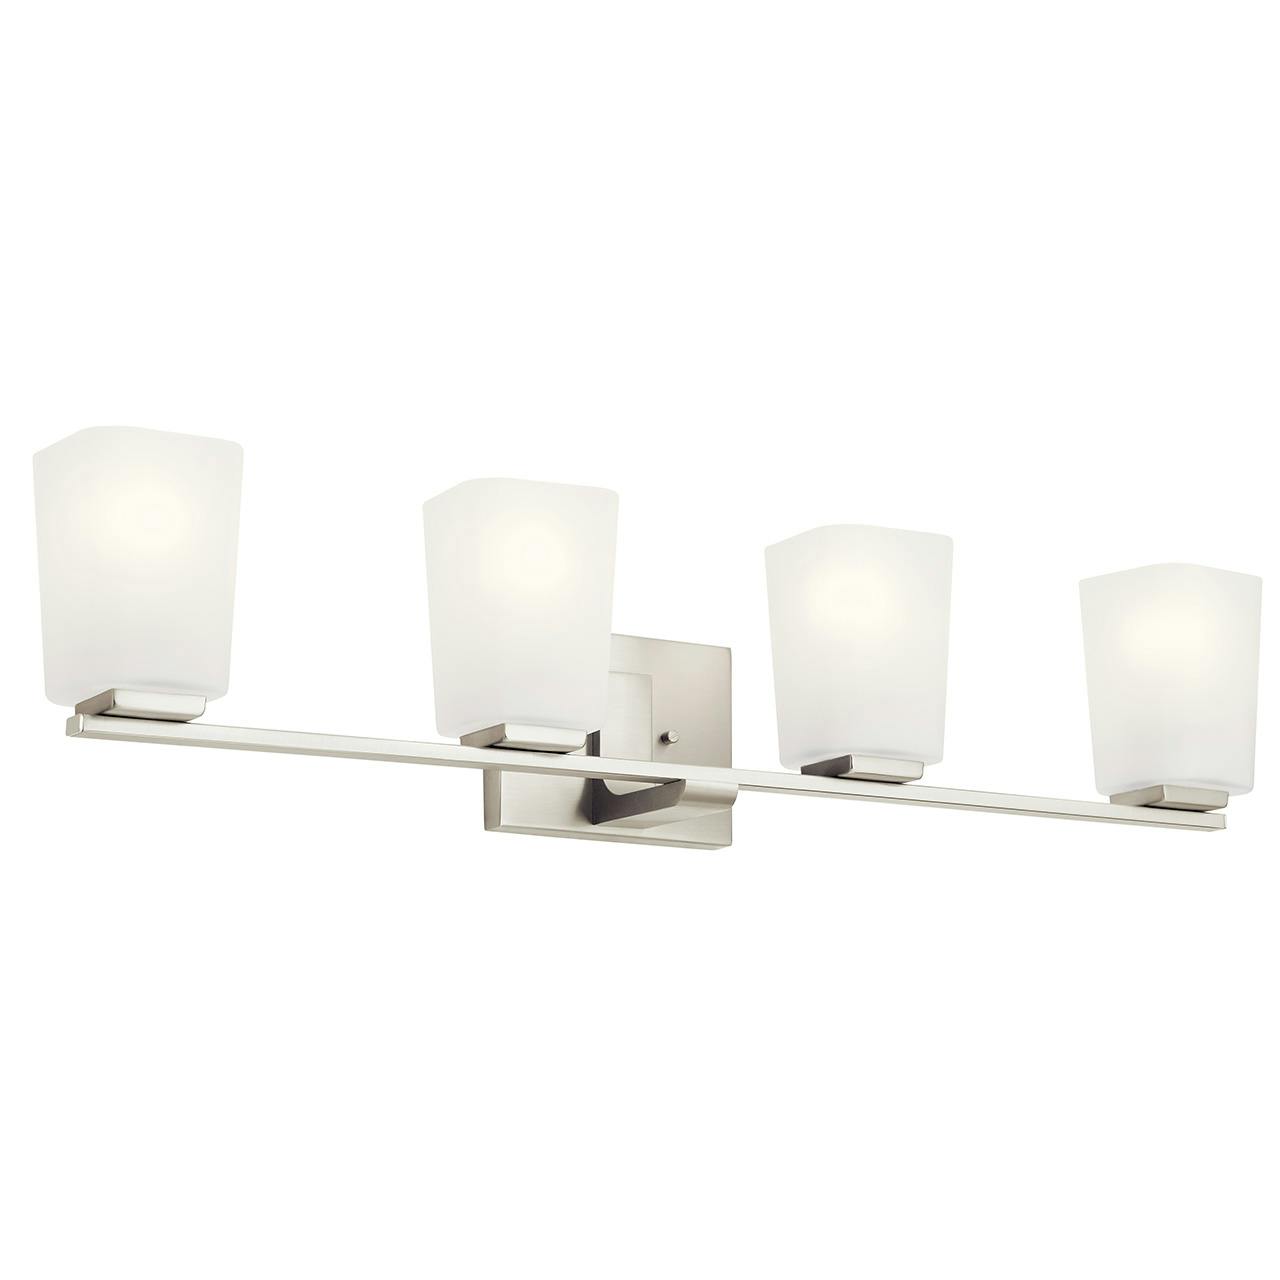 Roehm 4 Light Vanity Light Brushed Nickel on a white background